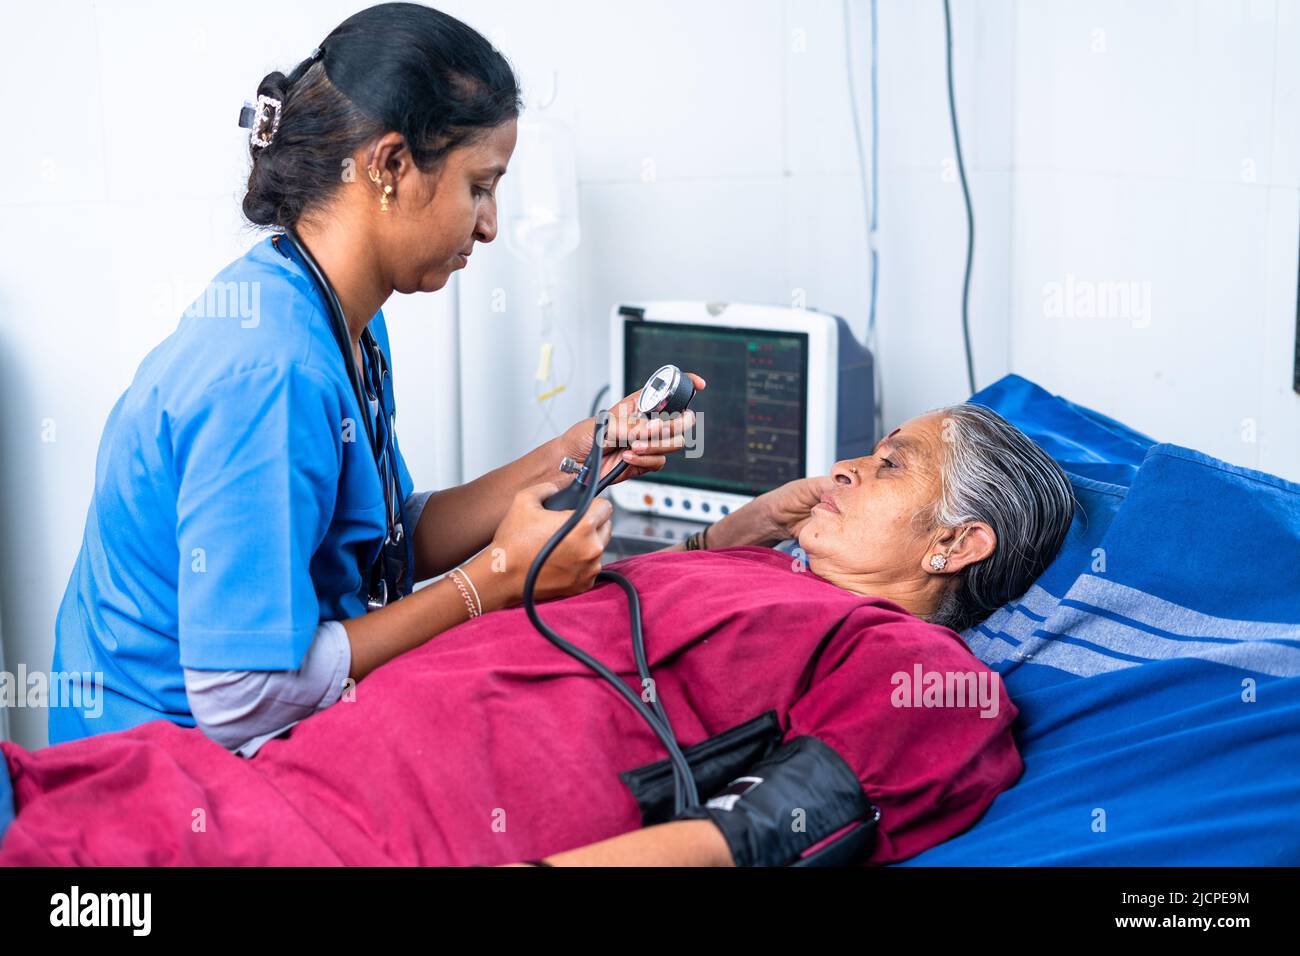 Nurse or doctor checking bp or blood pressure of senior sick patient at hospital on bed - concept of treatment, routine checkup and healthcare Stock Photo